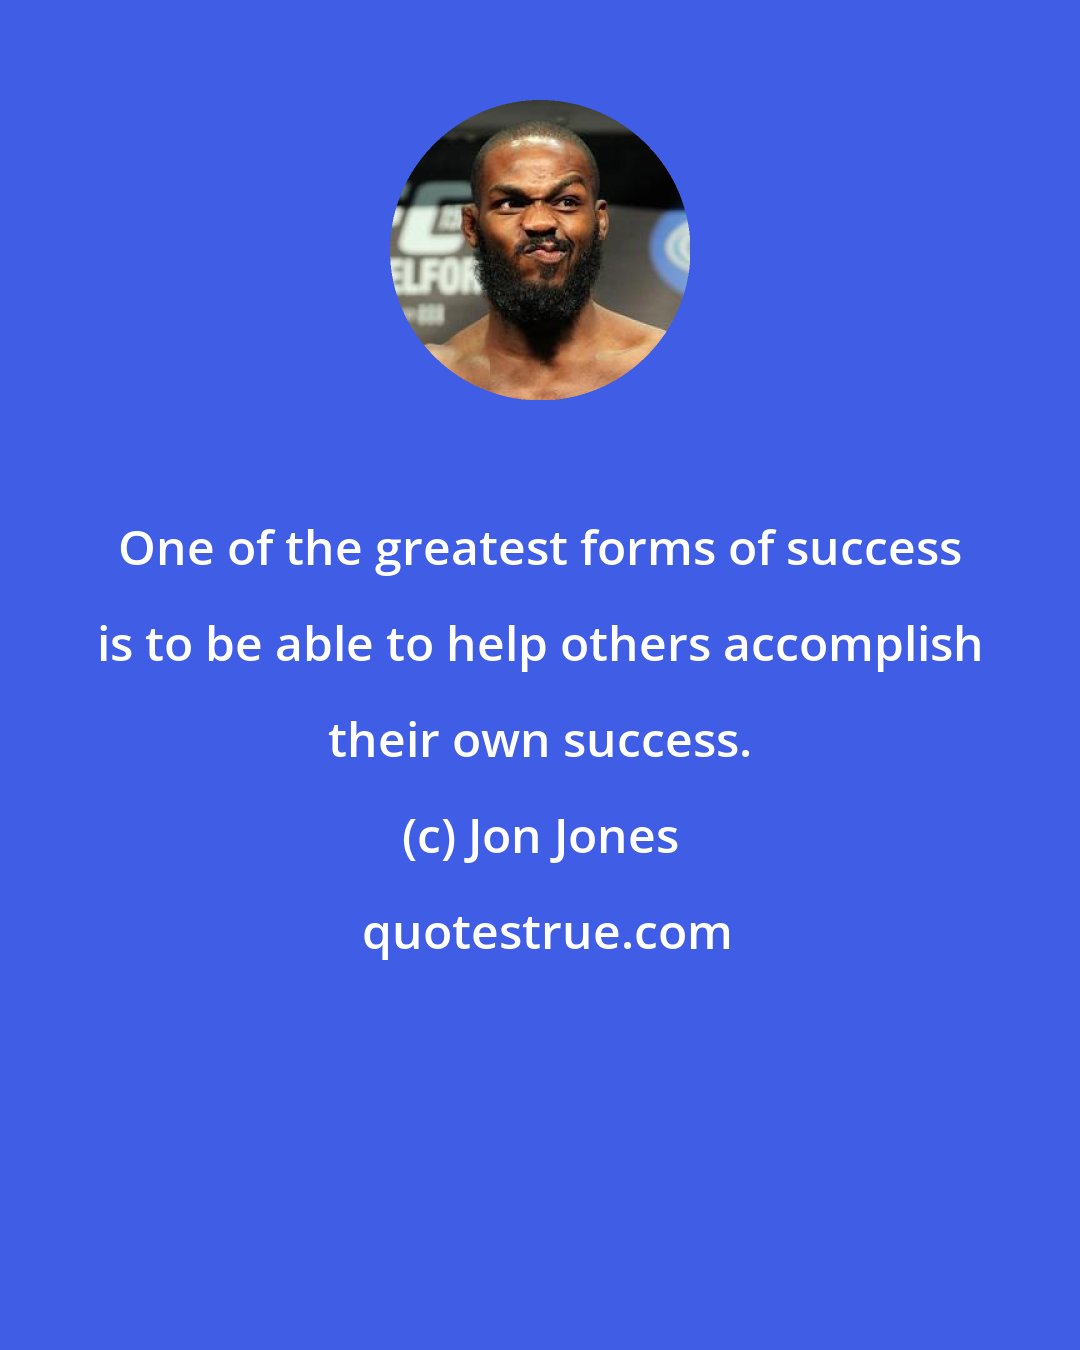 Jon Jones: One of the greatest forms of success is to be able to help others accomplish their own success.